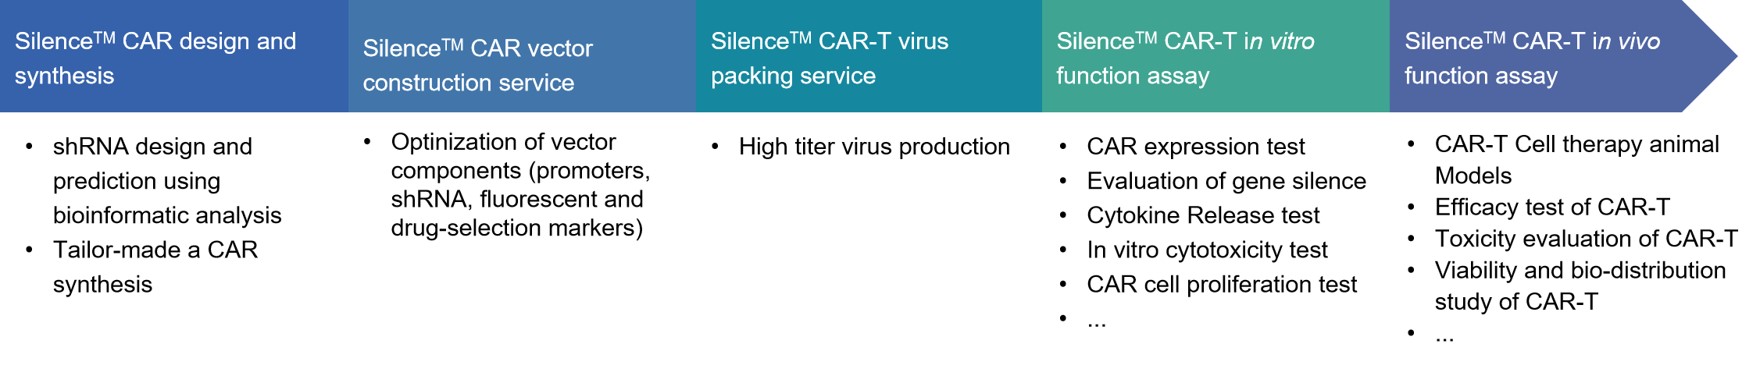 Workflow of Silence™ CAR-T therapy development.